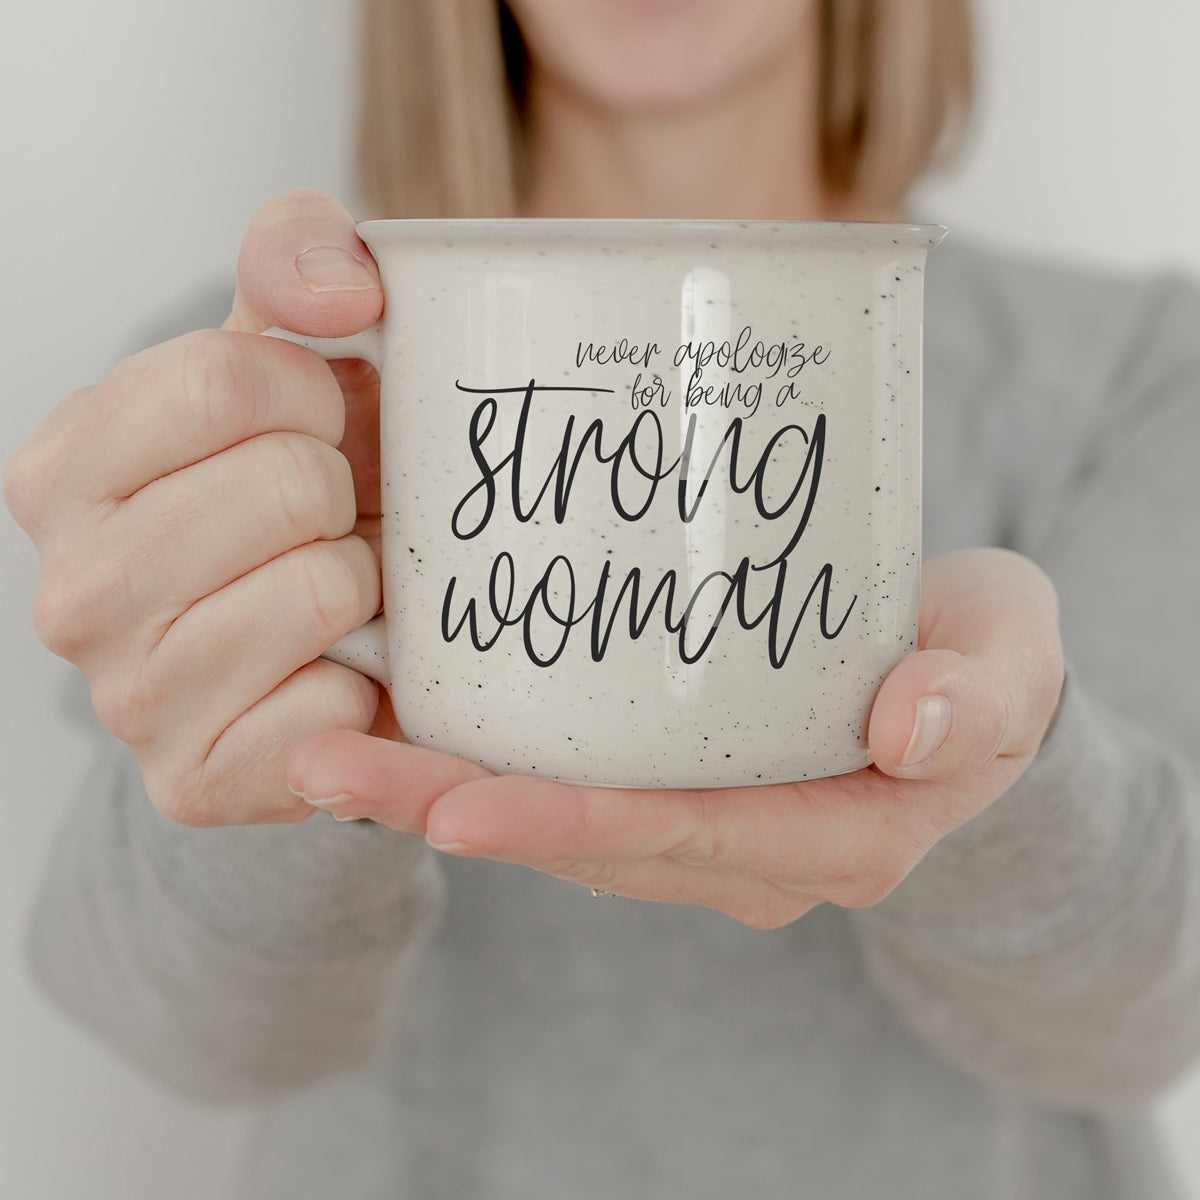 Women Empowerment Coffee Mug Quotes, gifts for her